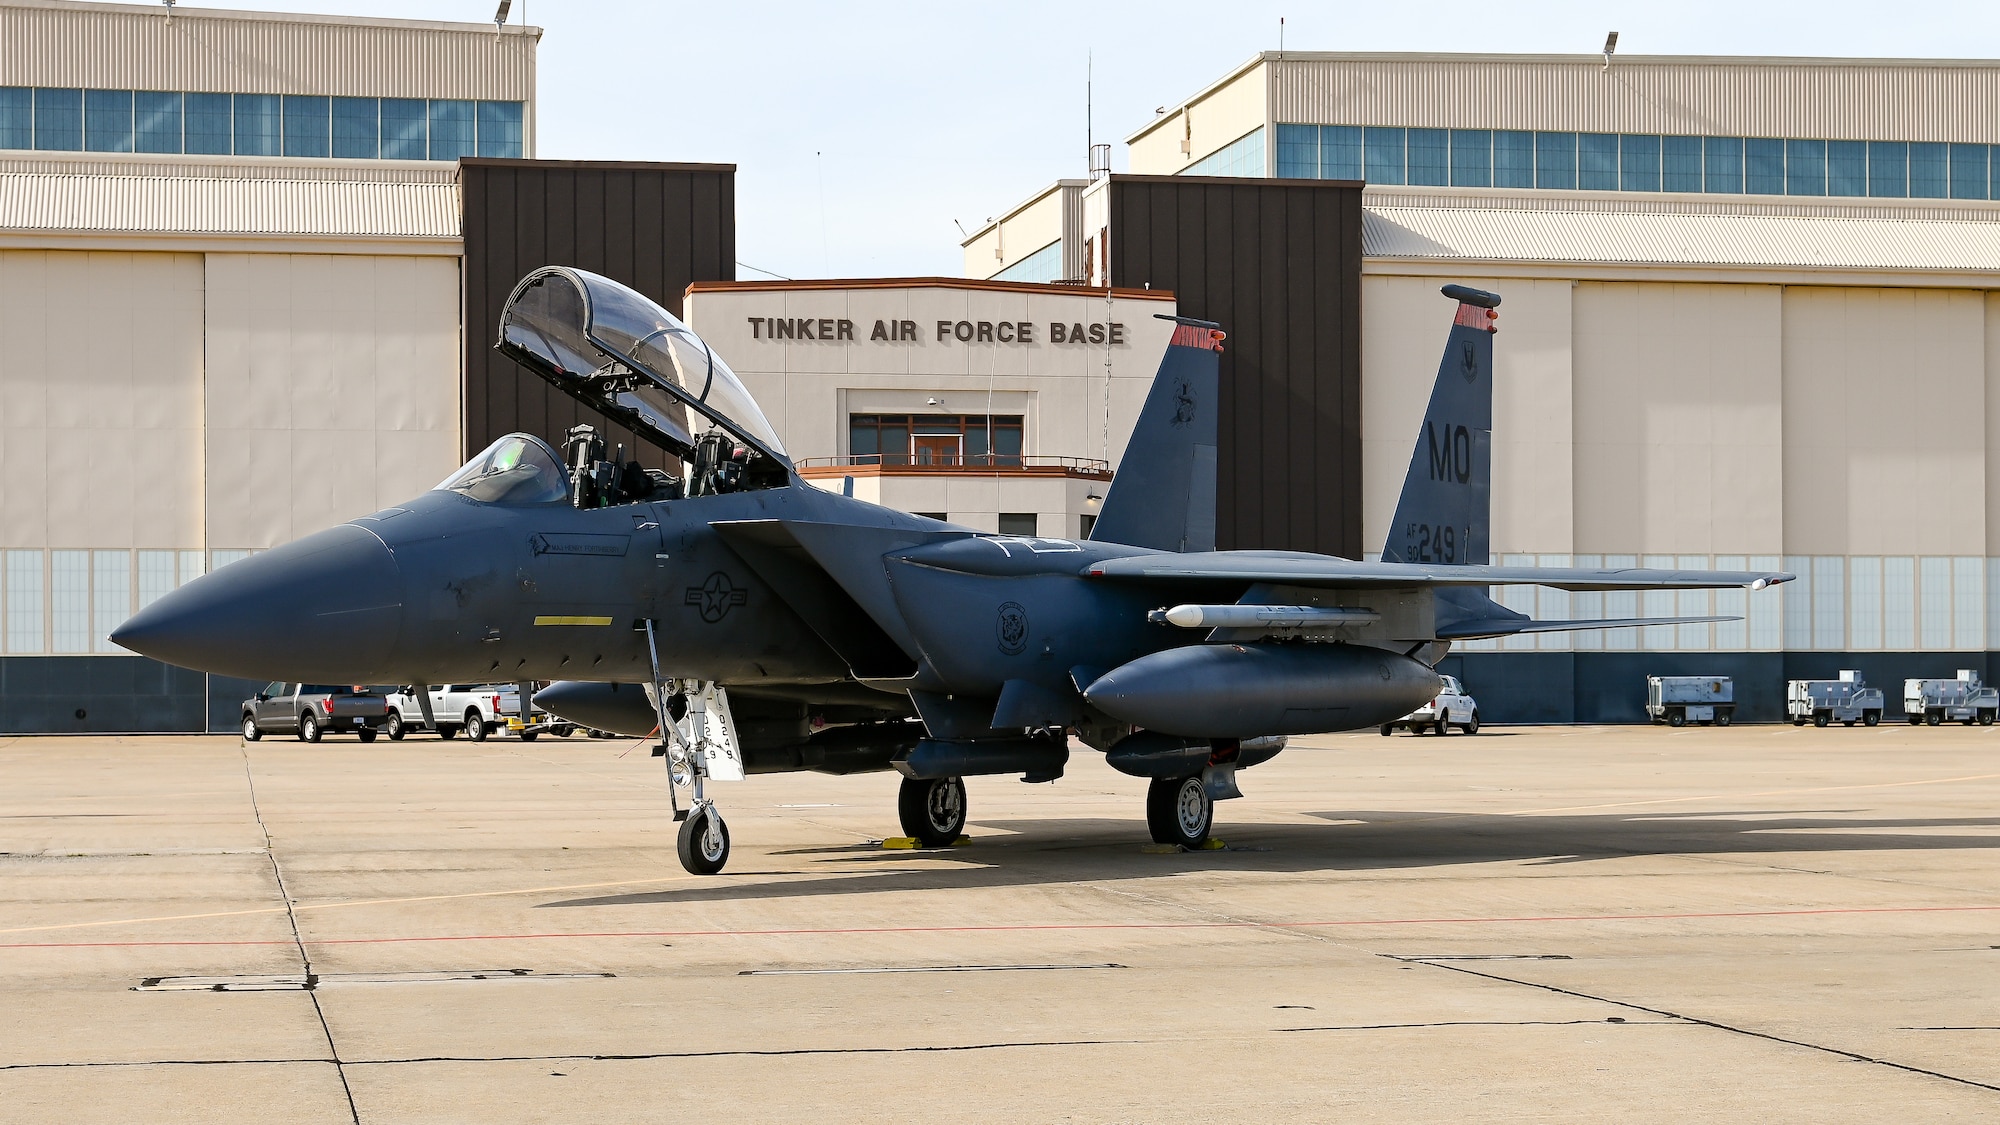 F-15 aircraft parked in front of base operations building